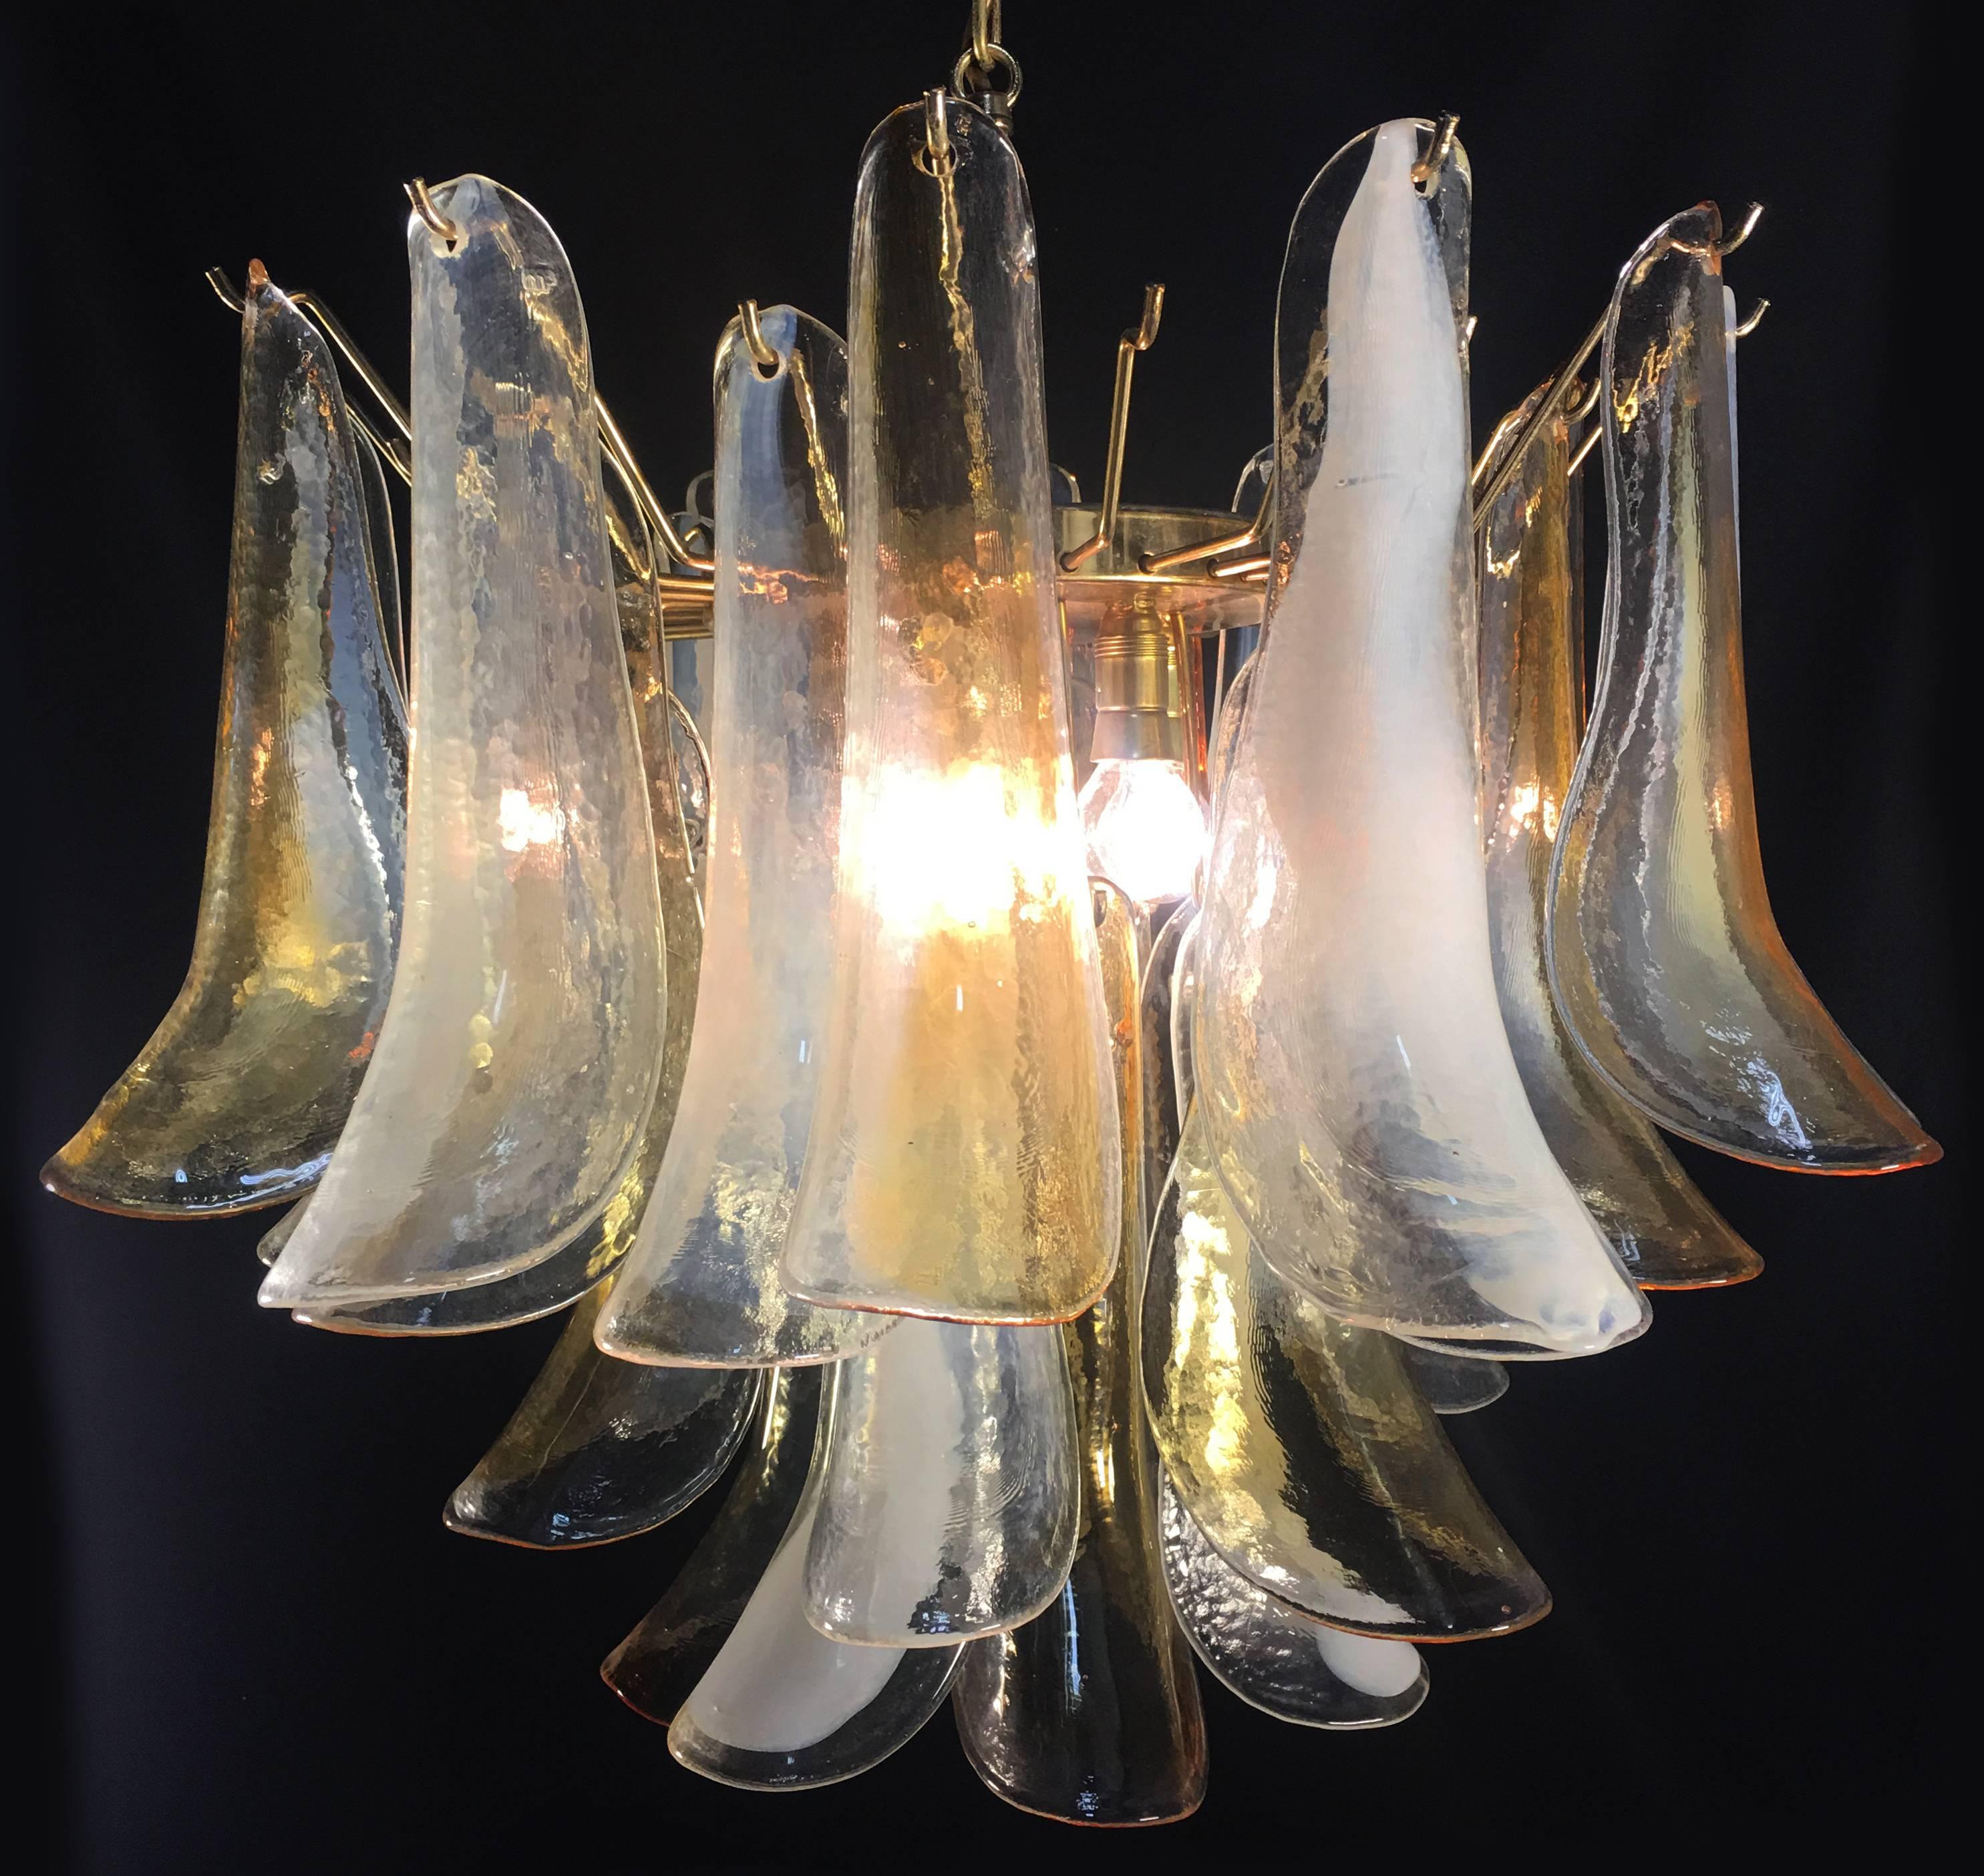 Elegant Pair of Chandeliers 36  White and Amber Petals, Murano, 1990s For Sale 5